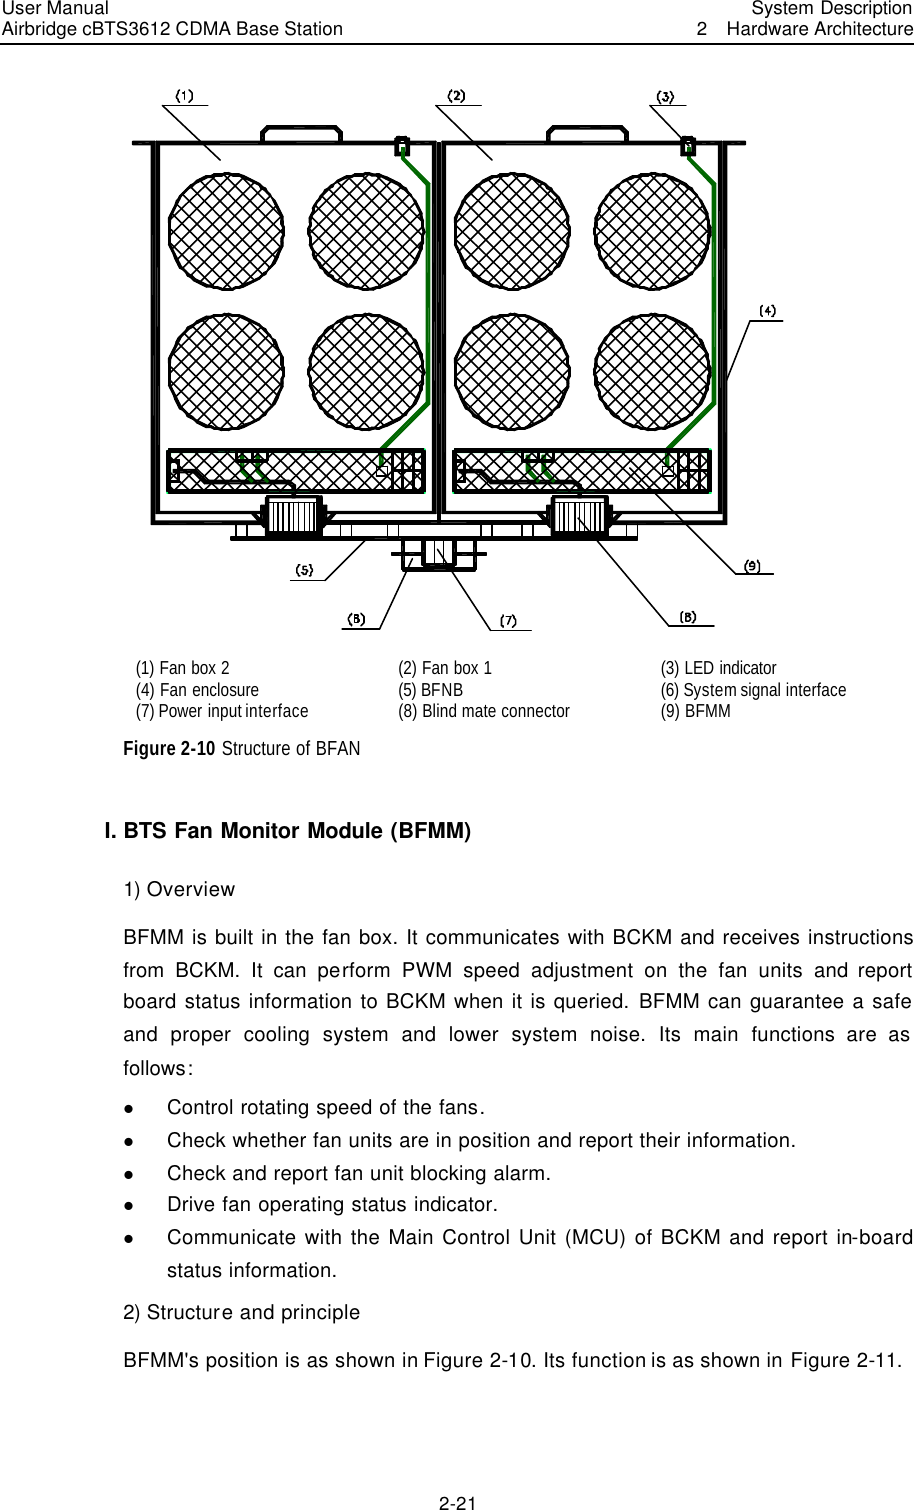 User Manual Airbridge cBTS3612 CDMA Base Station   System Description2  Hardware Architecture 2-21  (1) Fan box 2 (2) Fan box 1 (3) LED indicator (4) Fan enclosure (5) BFNB (6) System signal interface (7) Power input interface (8) Blind mate connector (9) BFMM Figure 2-10 Structure of BFAN I. BTS Fan Monitor Module (BFMM) 1) Overview BFMM is built in the fan box. It communicates with BCKM and receives instructions from BCKM. It can perform PWM speed adjustment on the fan units and report board status information to BCKM when it is queried. BFMM can guarantee a safe and proper cooling system and lower system noise. Its main functions are as follows:   l Control rotating speed of the fans.   l Check whether fan units are in position and report their information.   l Check and report fan unit blocking alarm. l Drive fan operating status indicator. l Communicate with the Main Control Unit (MCU) of BCKM and report in-board status information. 2) Structure and principle BFMM&apos;s position is as shown in Figure 2-10. Its function is as shown in Figure 2-11.   